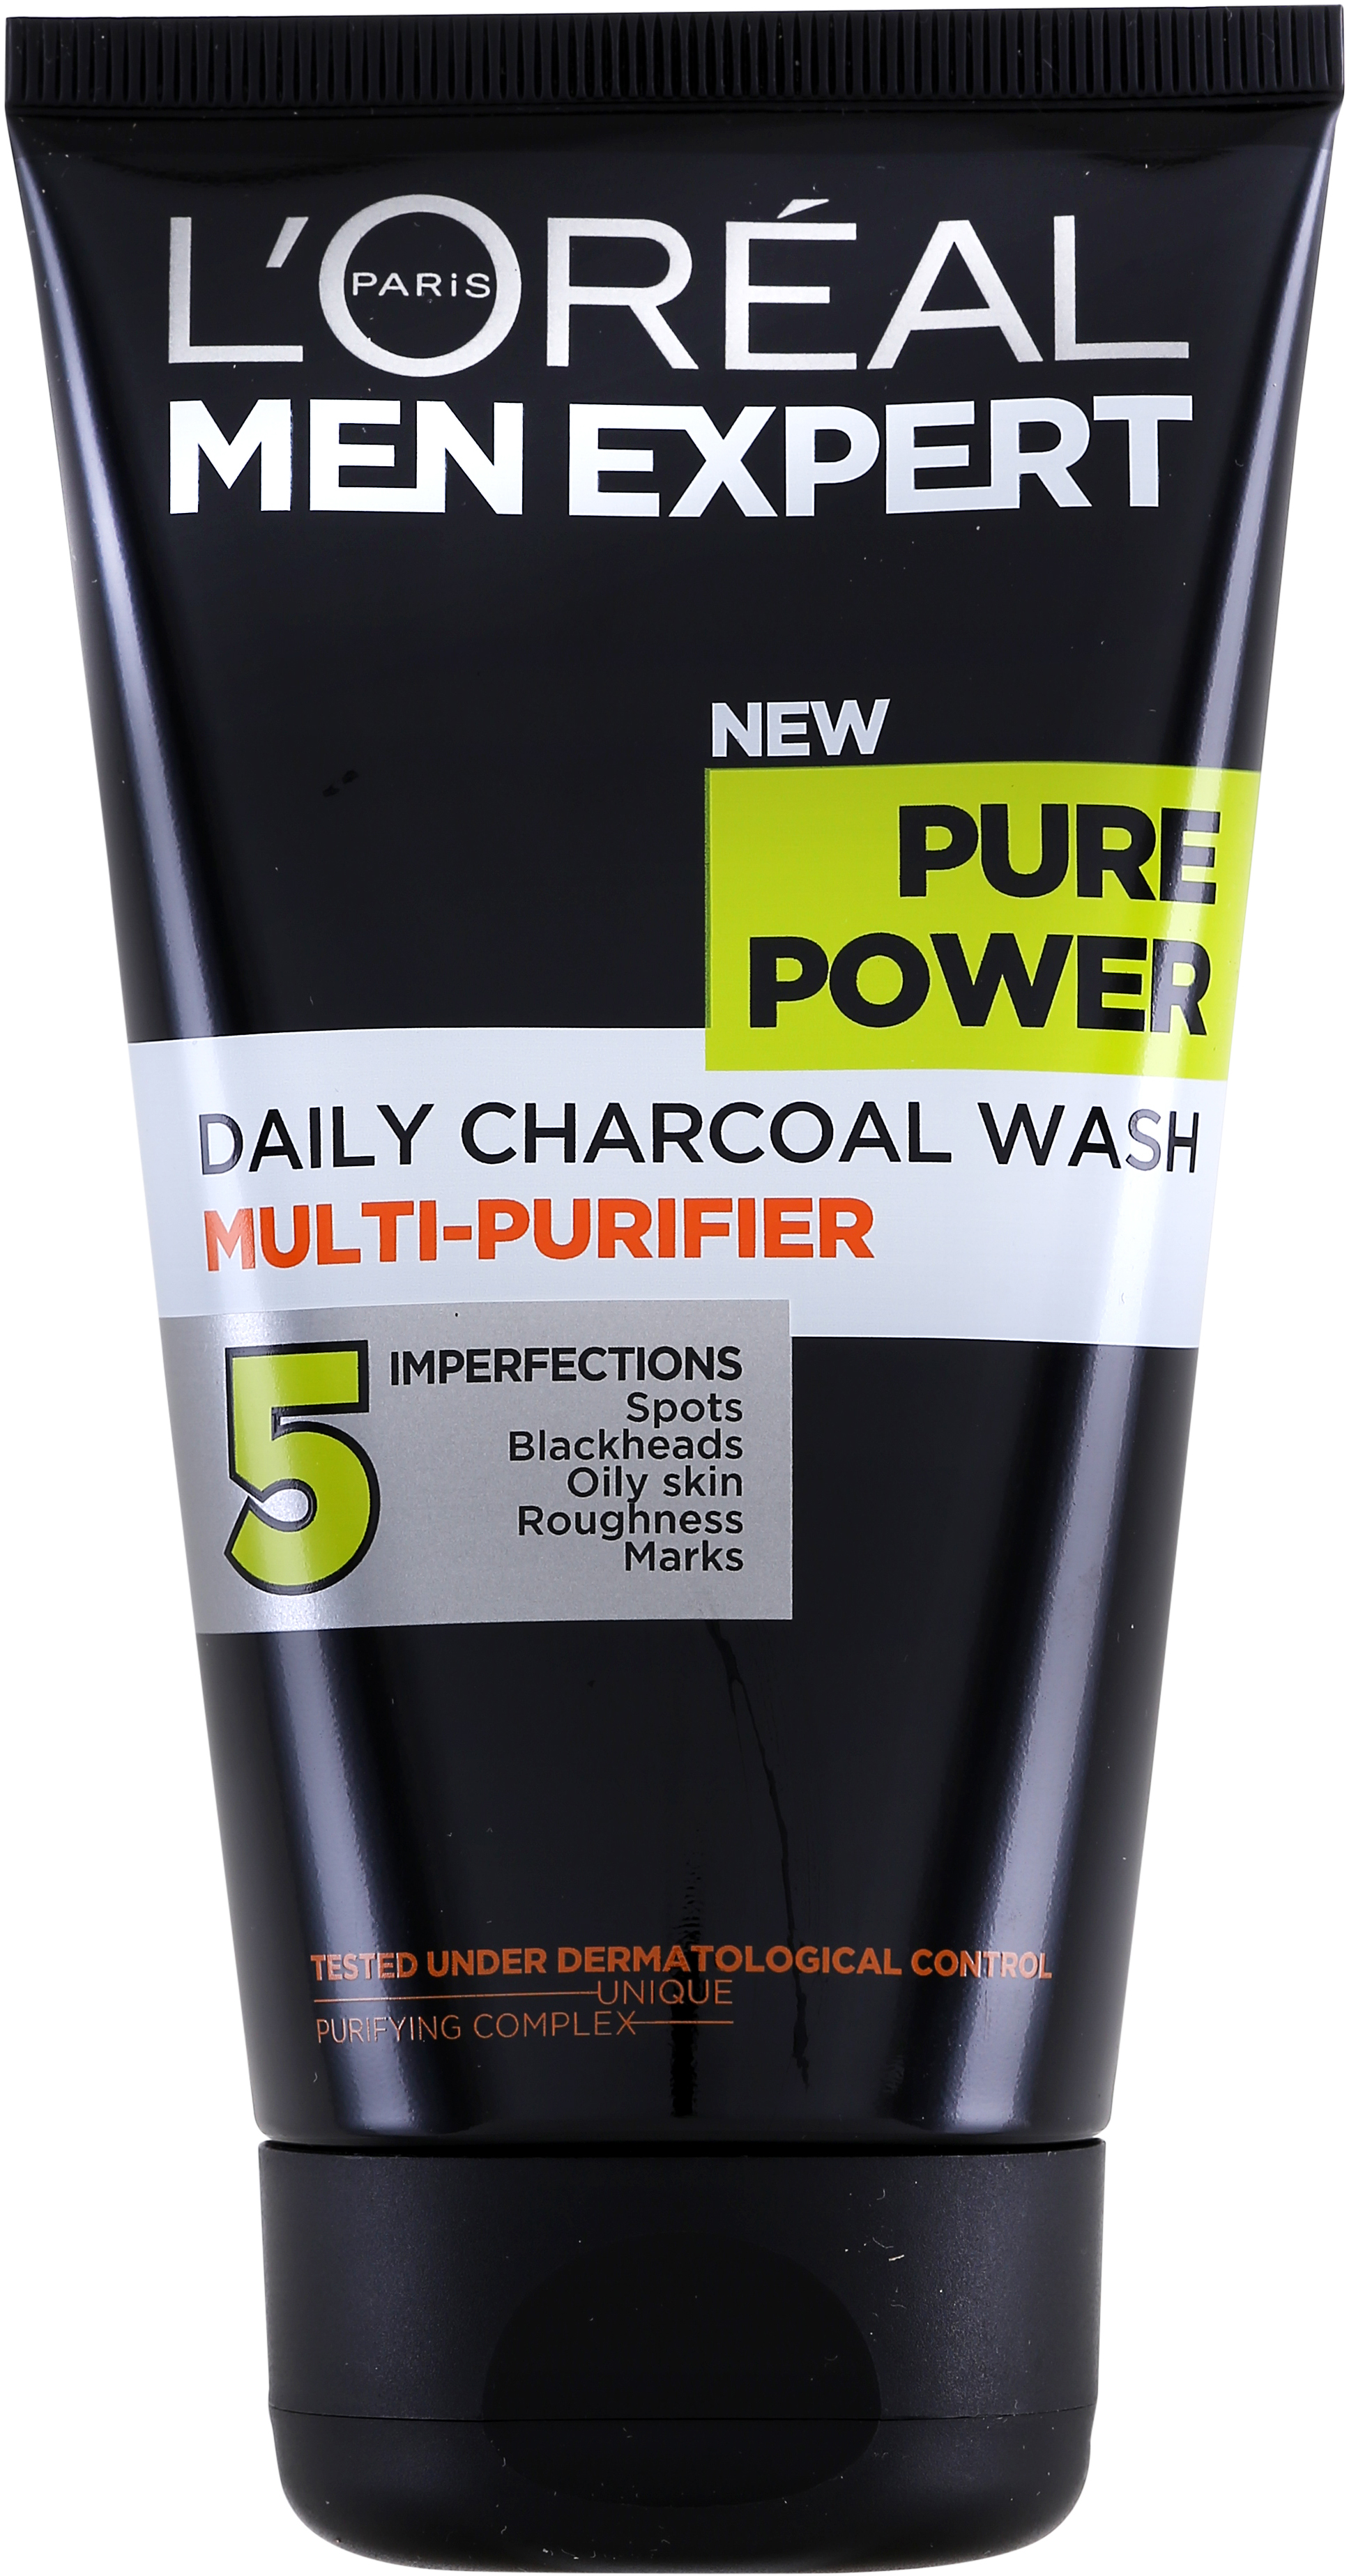 Loreal Men Expert Pure Power Daily Charcoal Wash